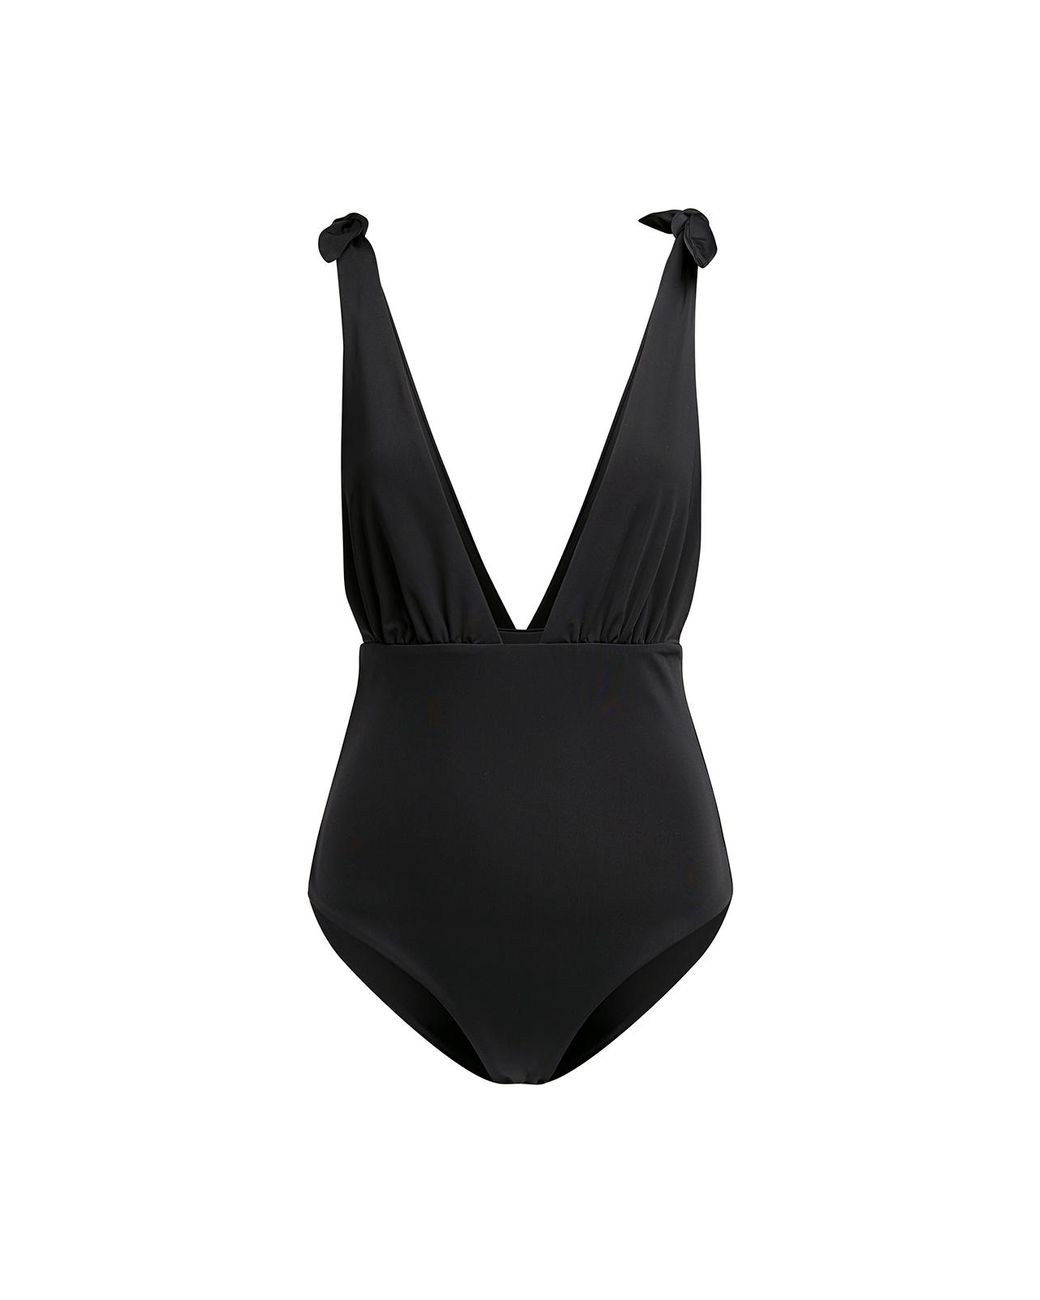 Mara Hoffman Synthetic Daphne Deep V One-piece Swimsuit in Black - Lyst